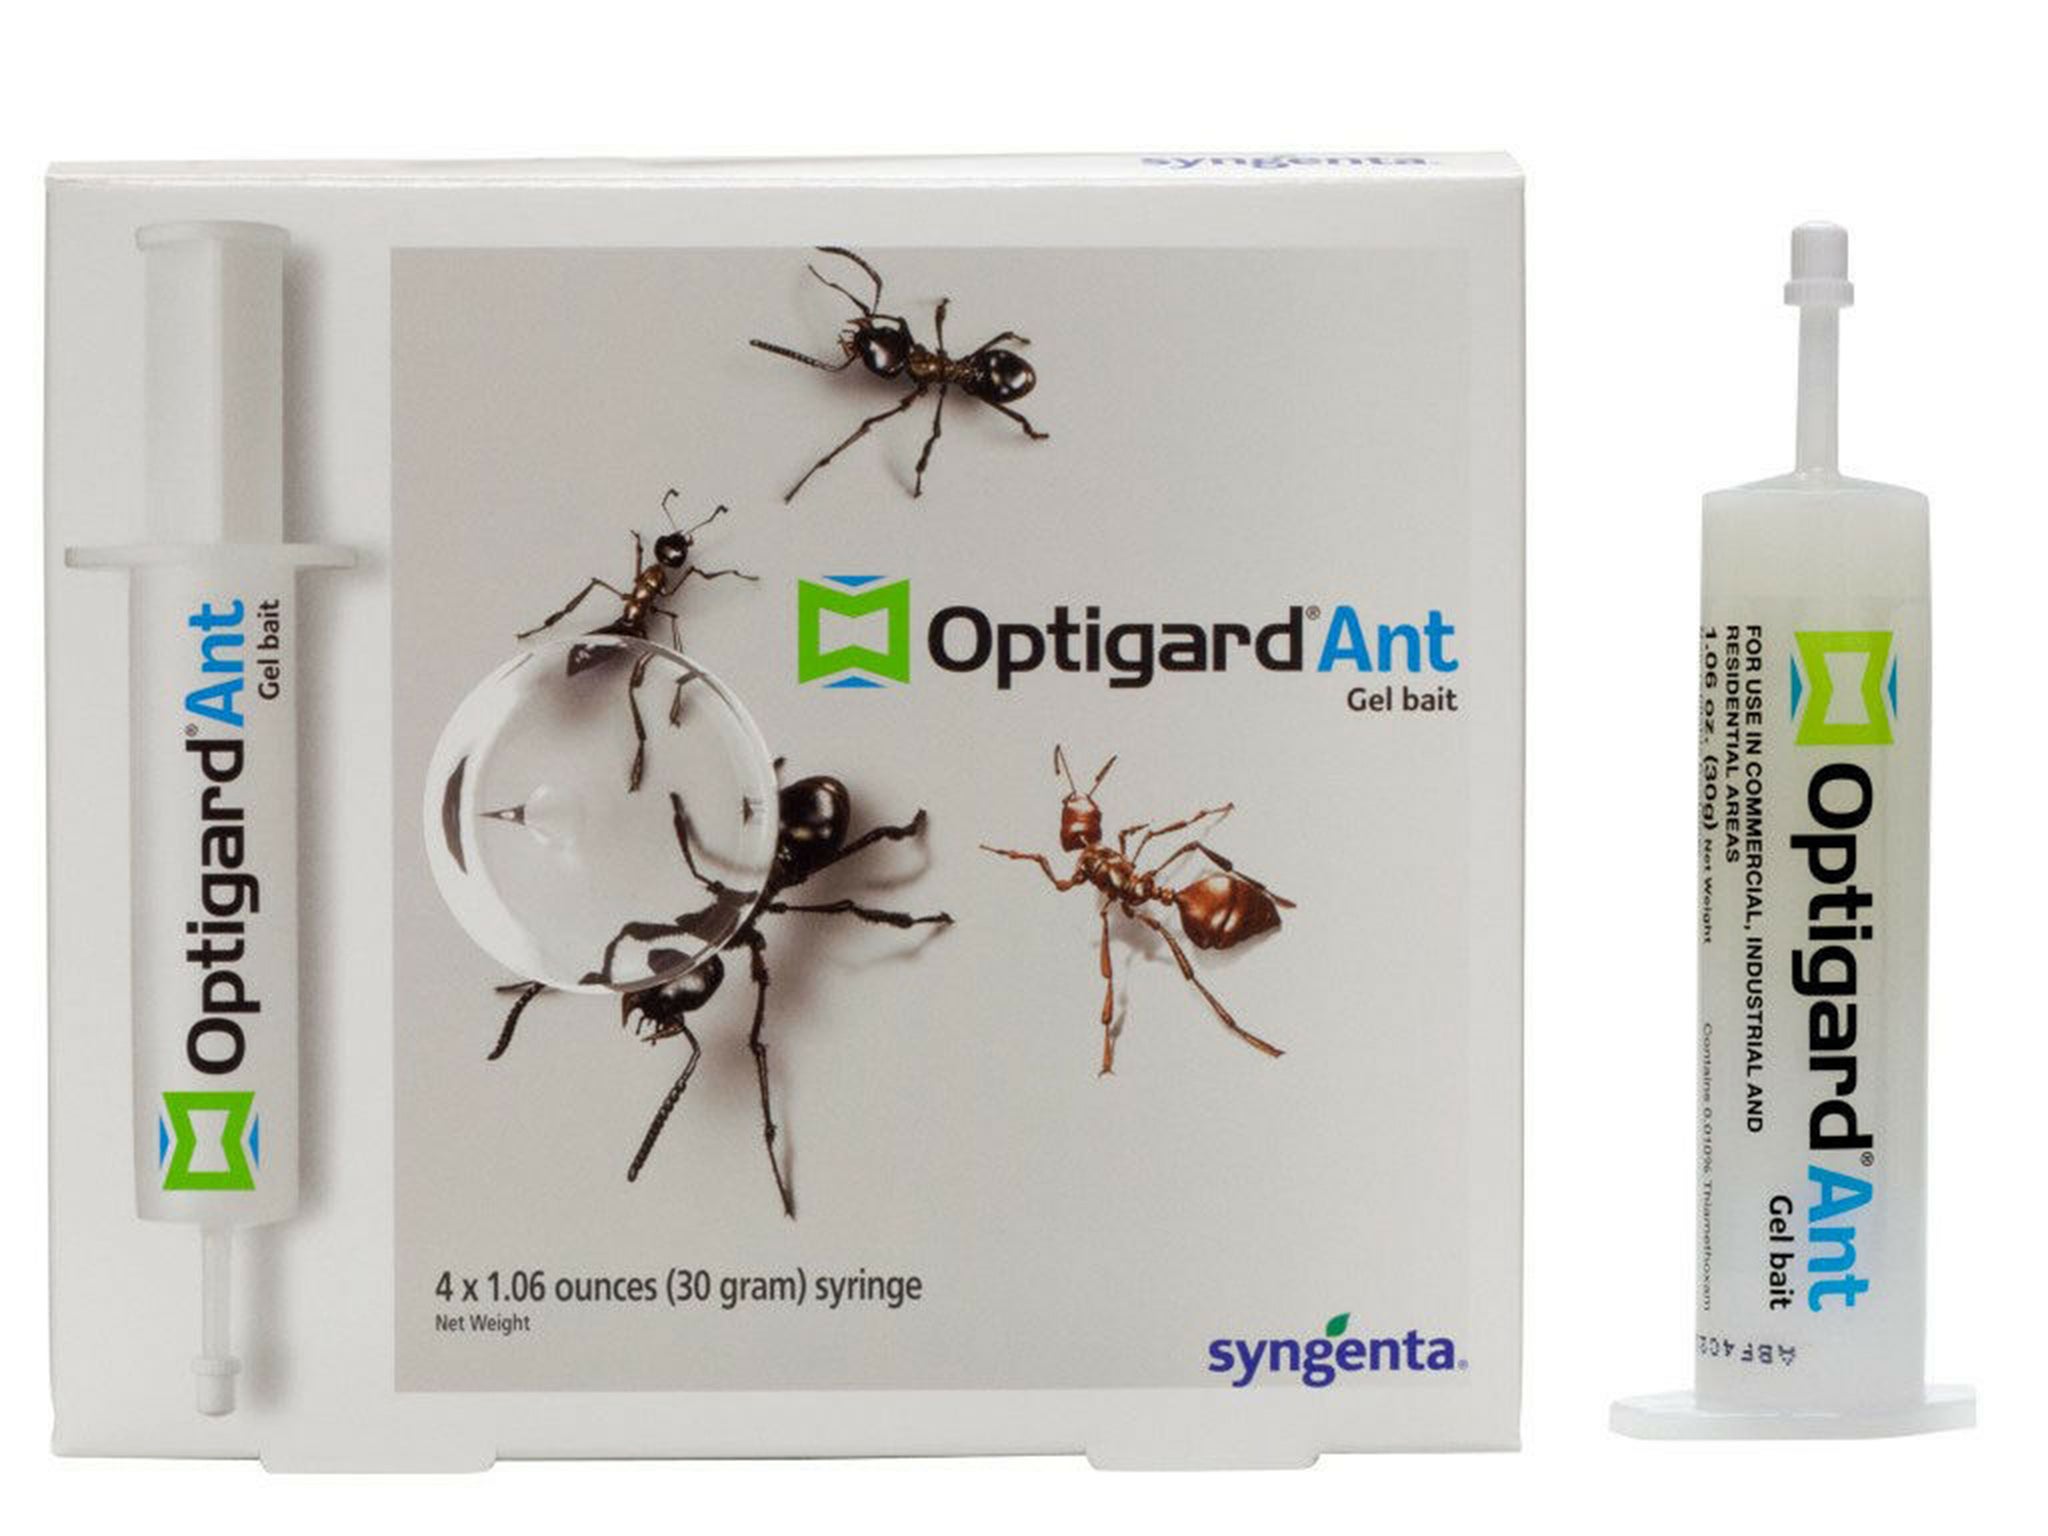 The secret to getting rid of ants permanently isnt harsh chemicals - its bait and traps